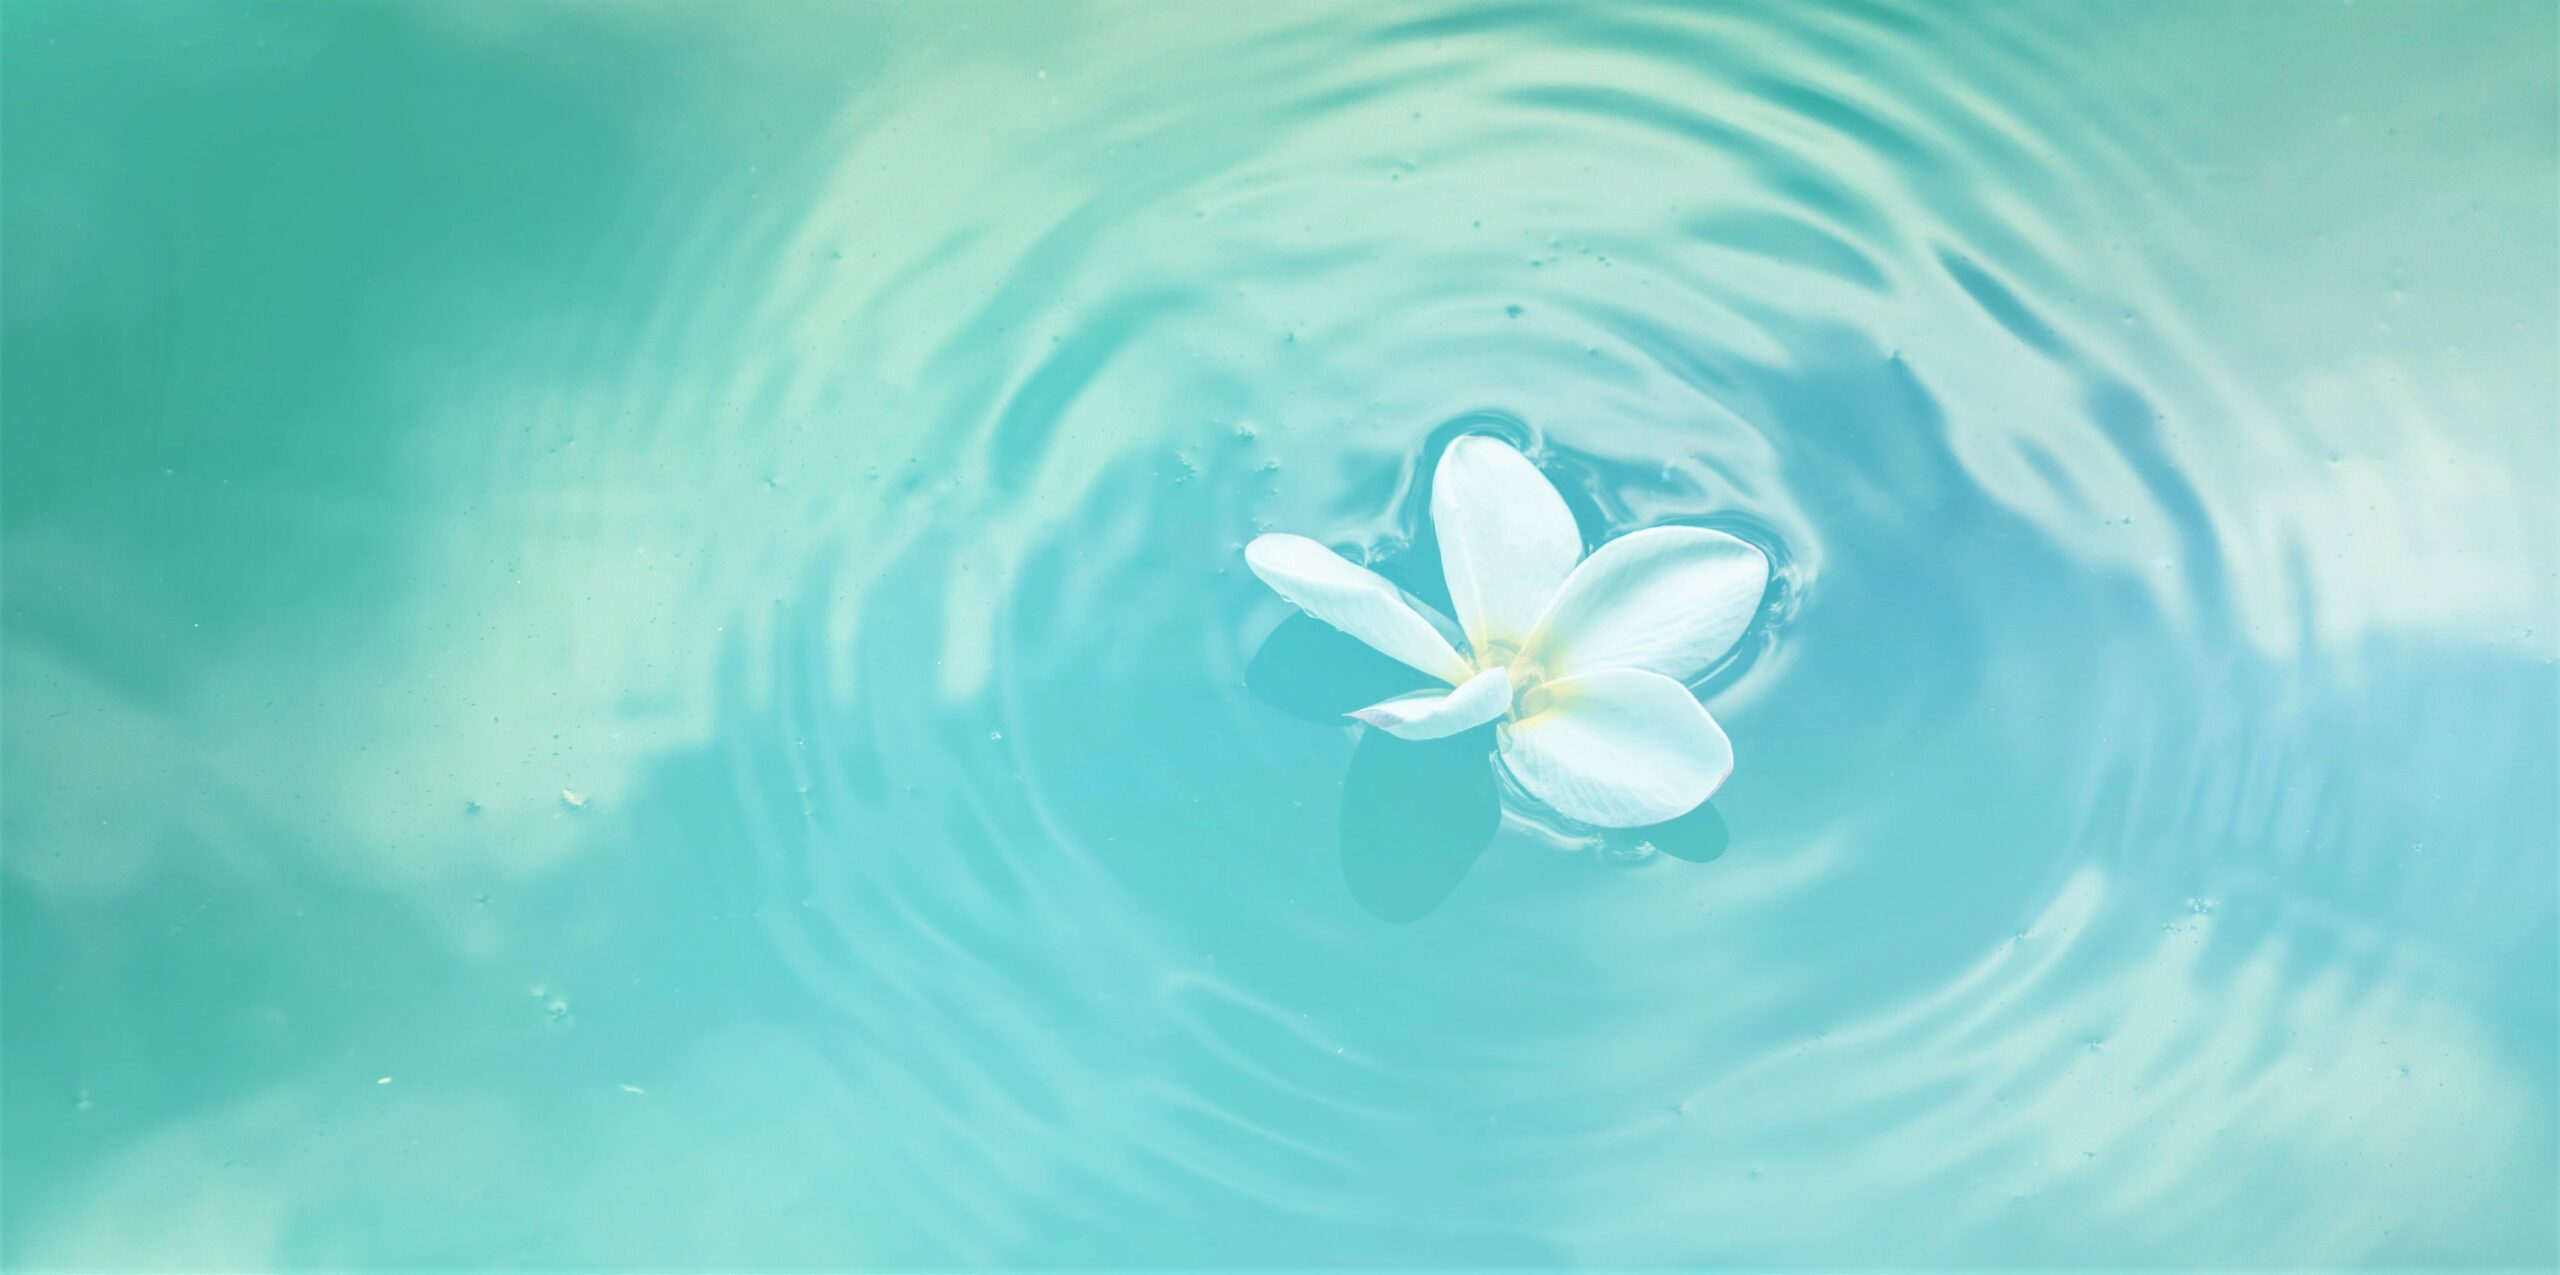 Visual representation of mindful living with white flower floating on turquoise water.